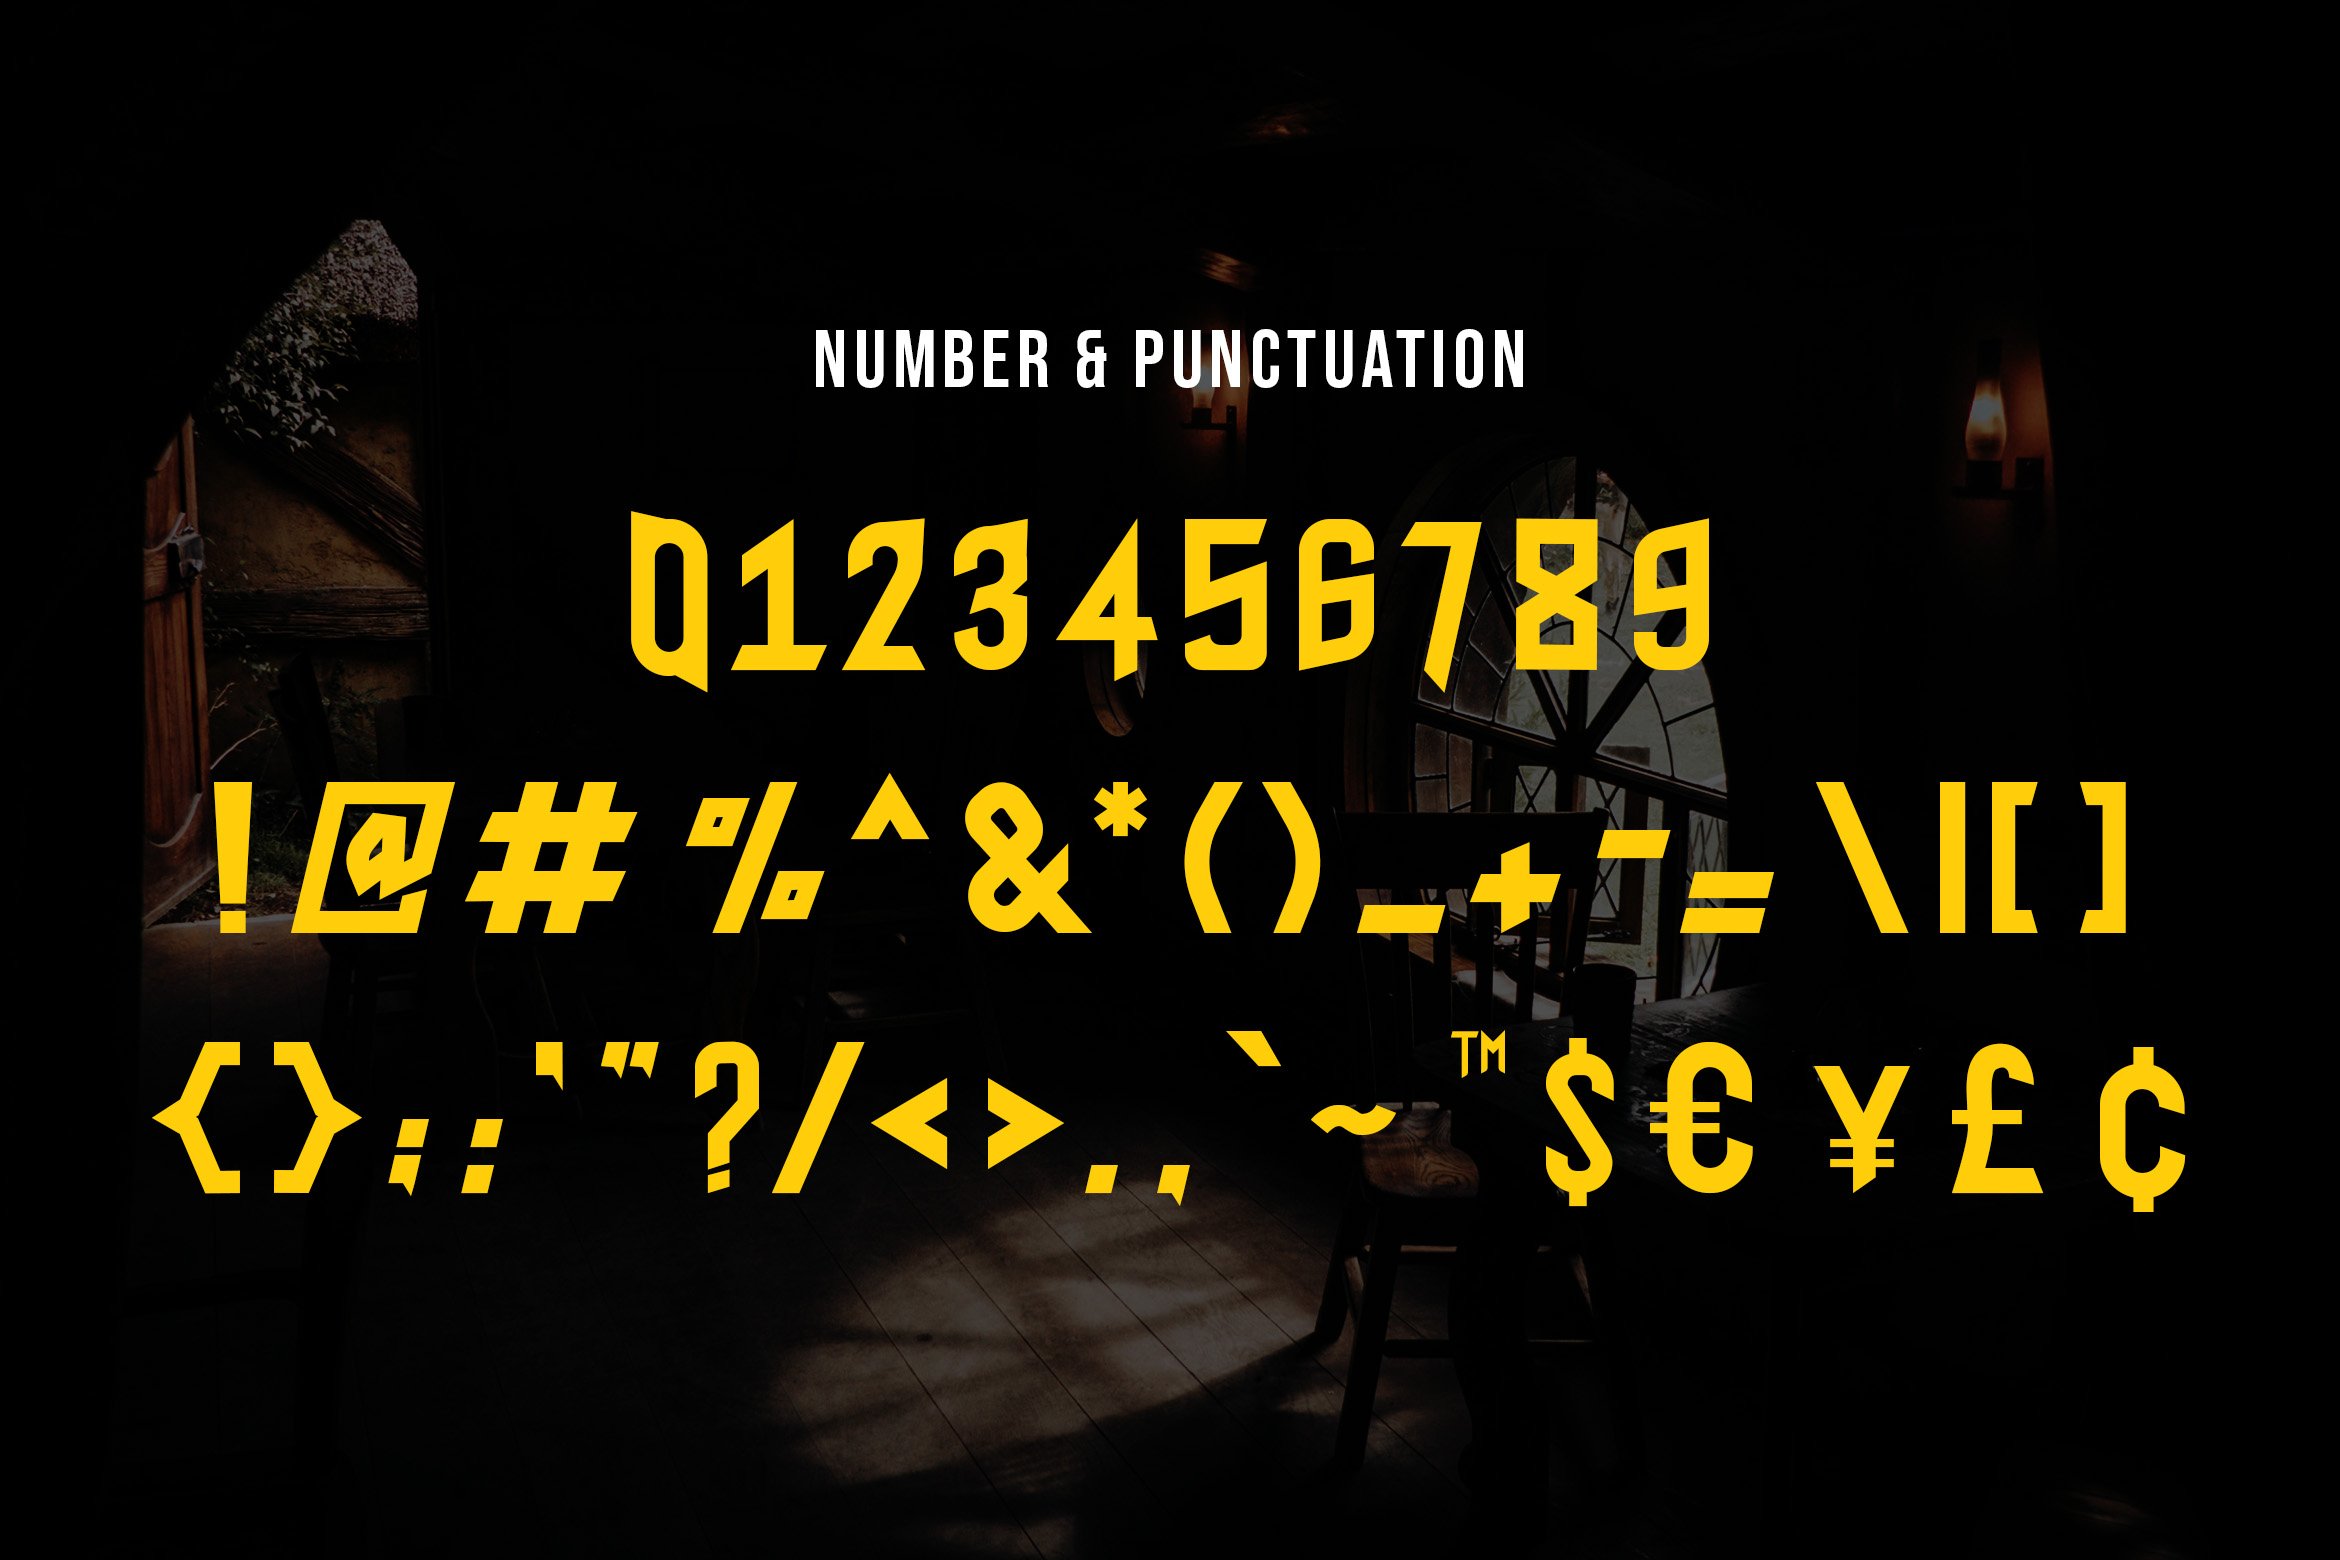 5. number punctuation 336